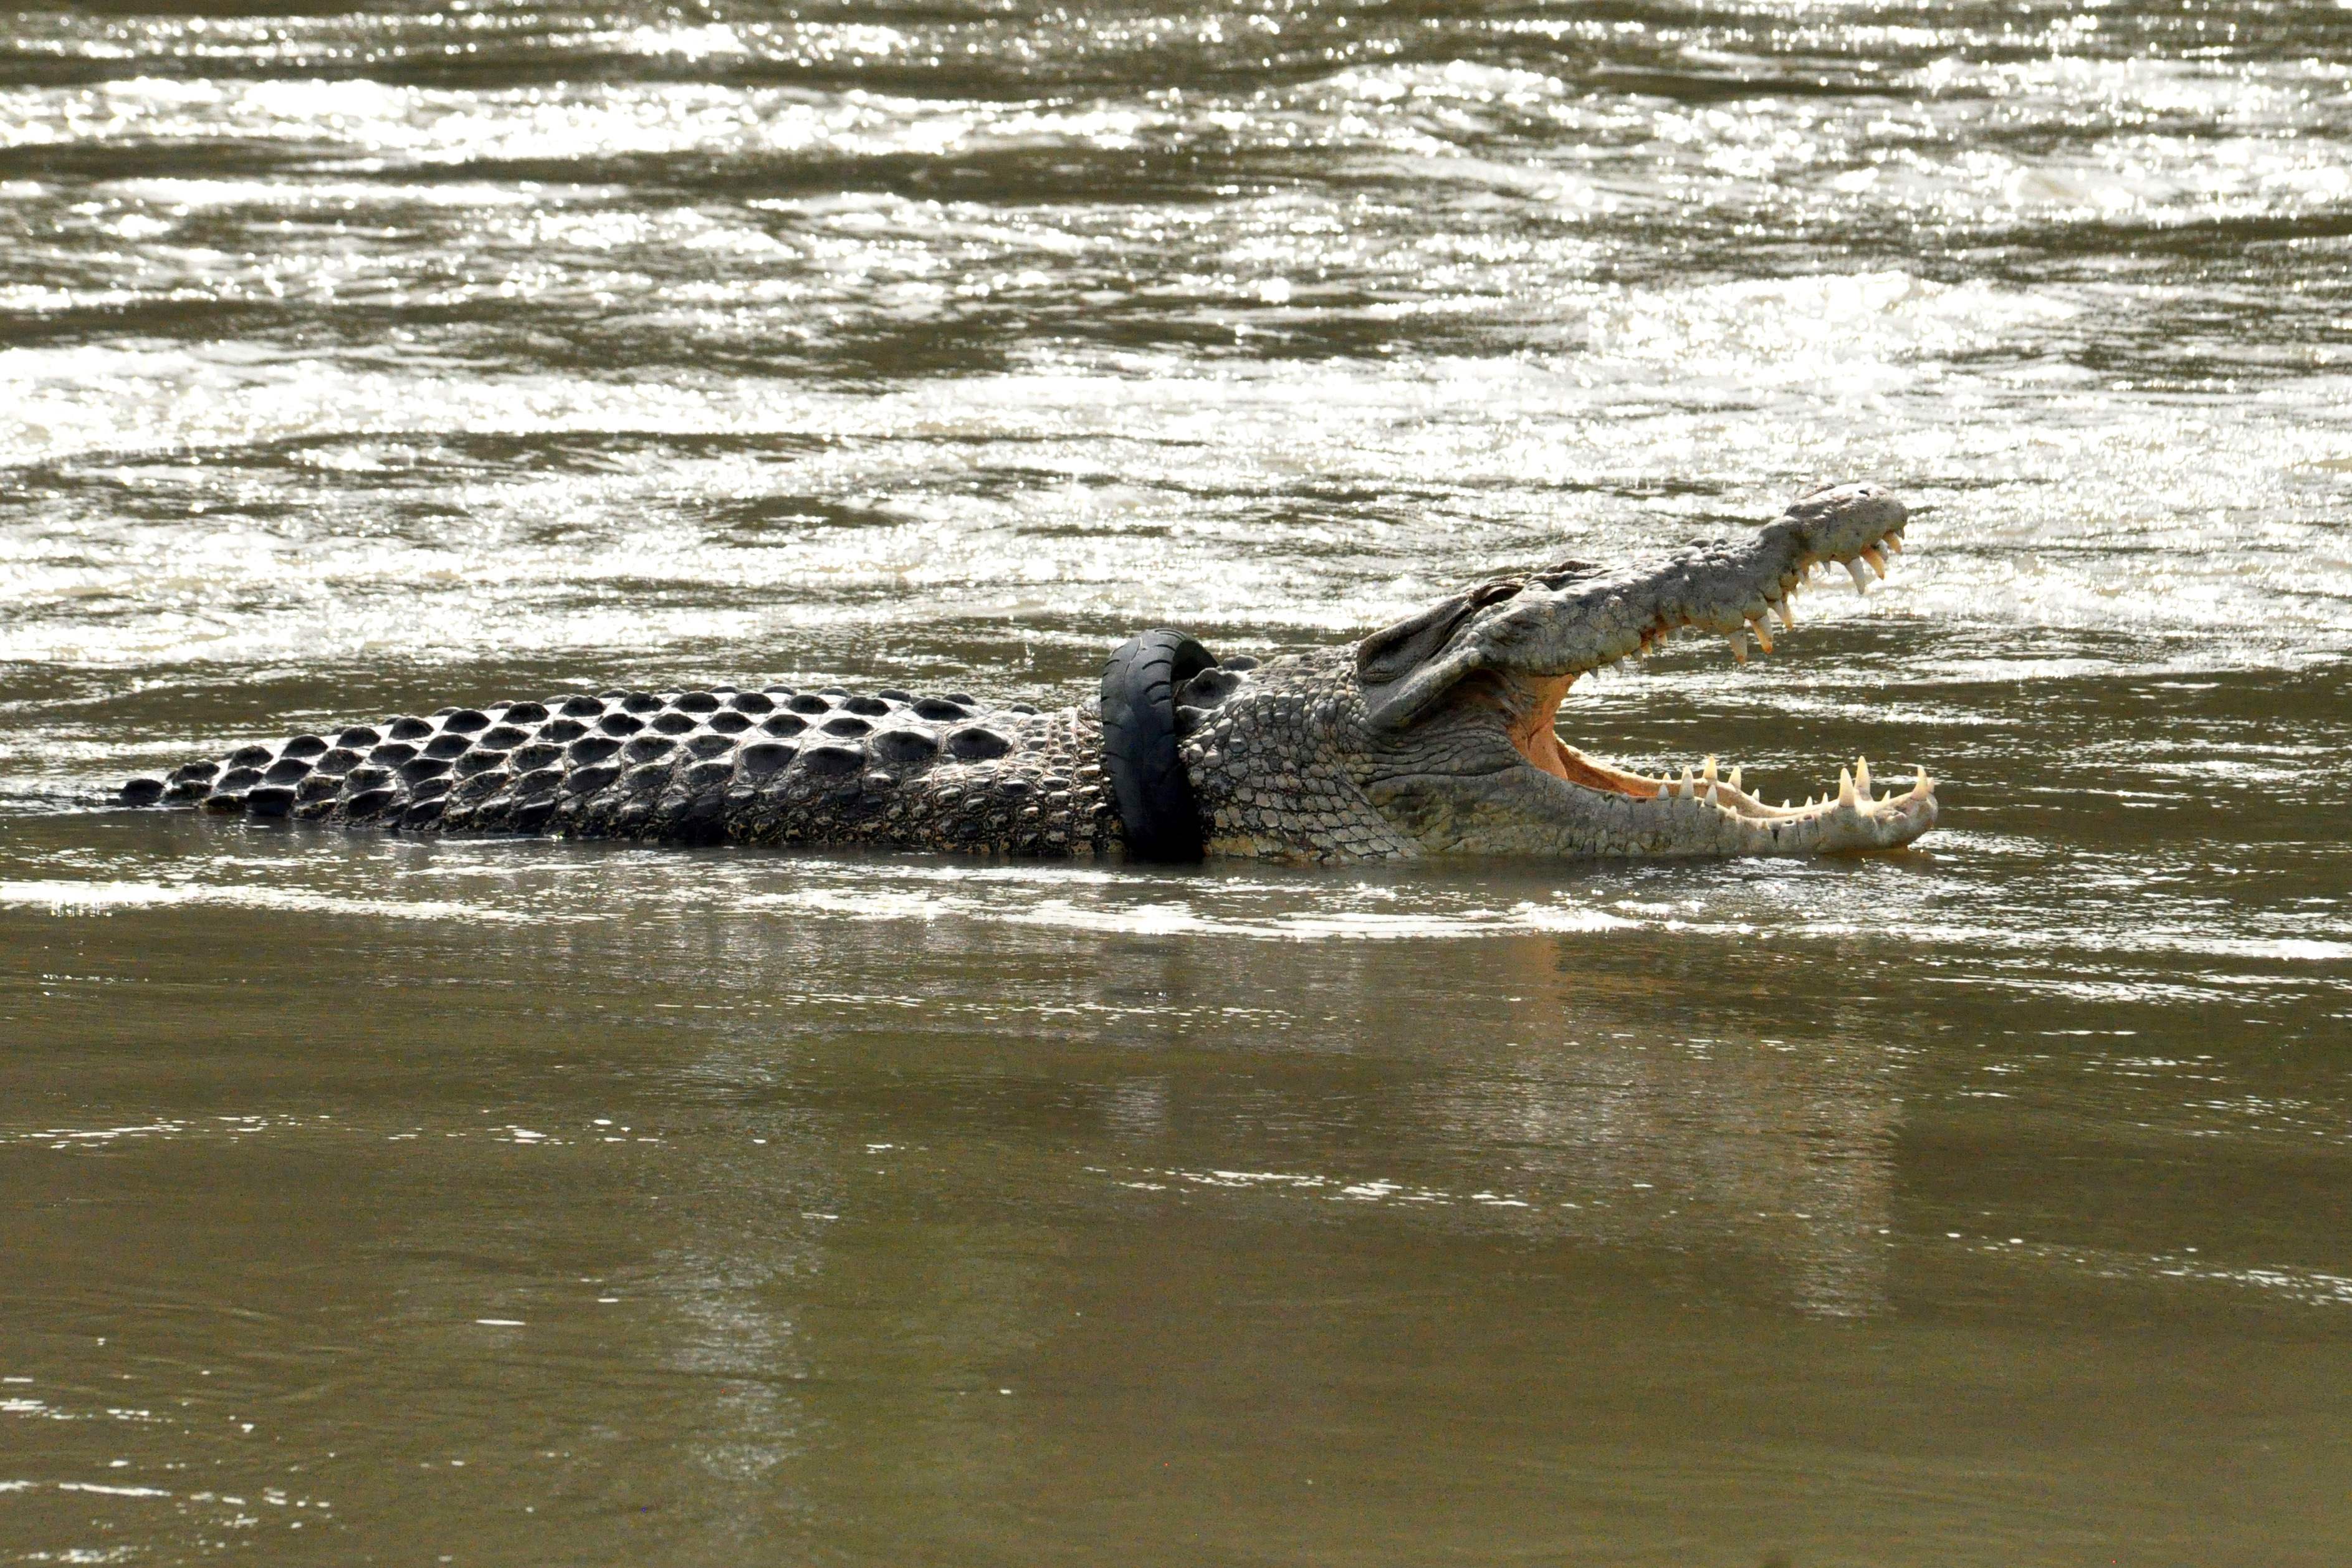 A crocodile with a motorbike tyre around its neck in a river in Palu, Central Sulawesi province, months after Australian television presenter and crocodile expert Matthew Nicholas Wright failed to trap it to remove the tyre